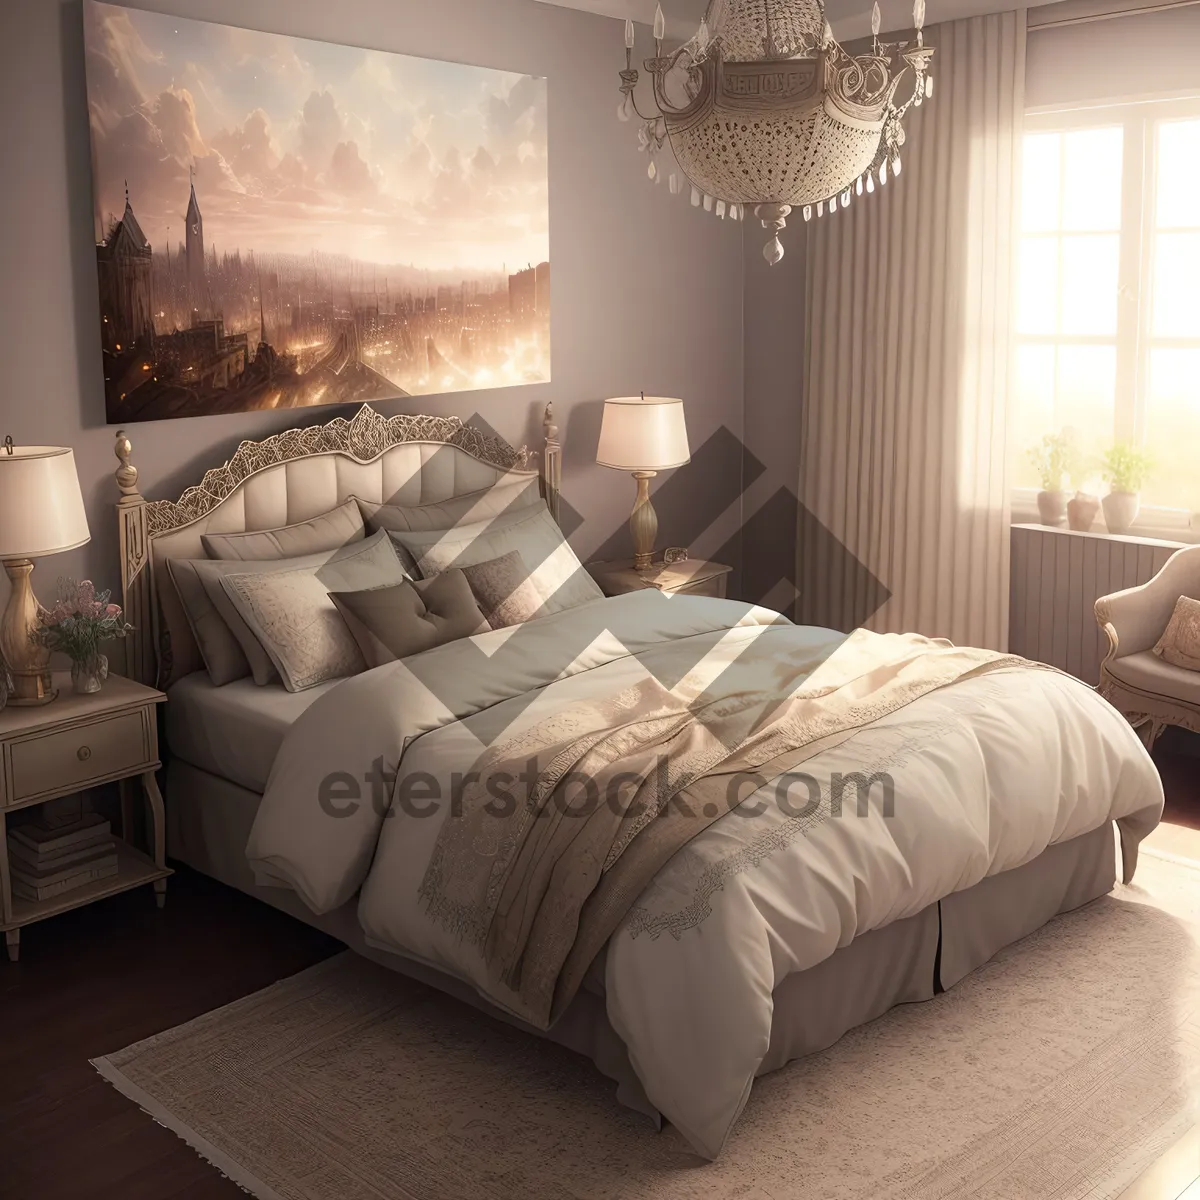 Picture of Cozy Modern Bedroom with Wood Panel Wall